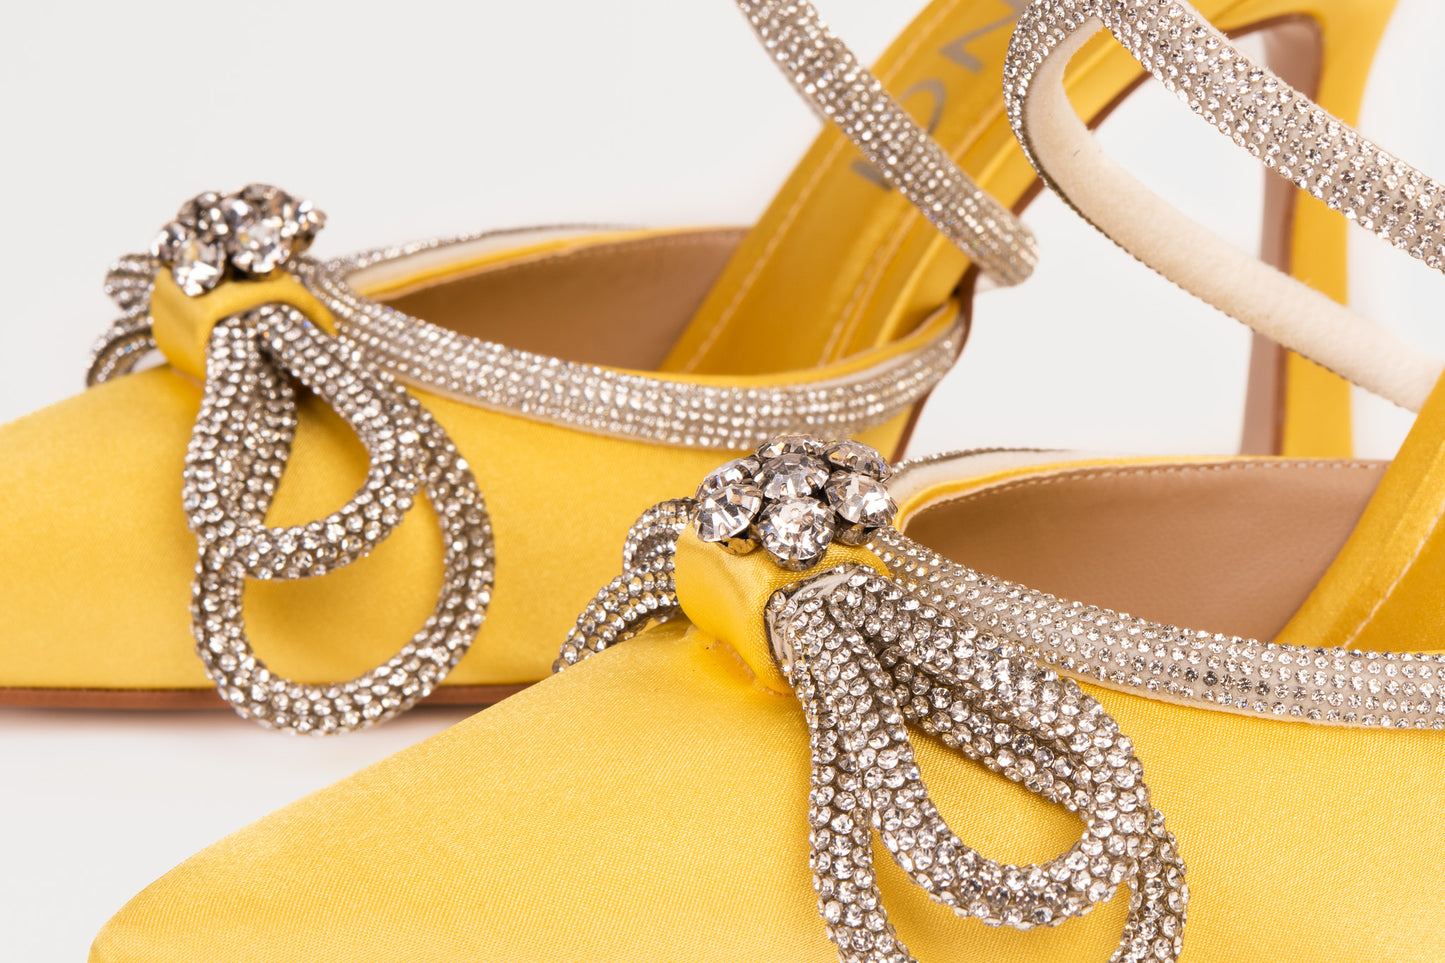 The Floransa Yellow Leather Pointy Toe Ankle Strap Women Sandal